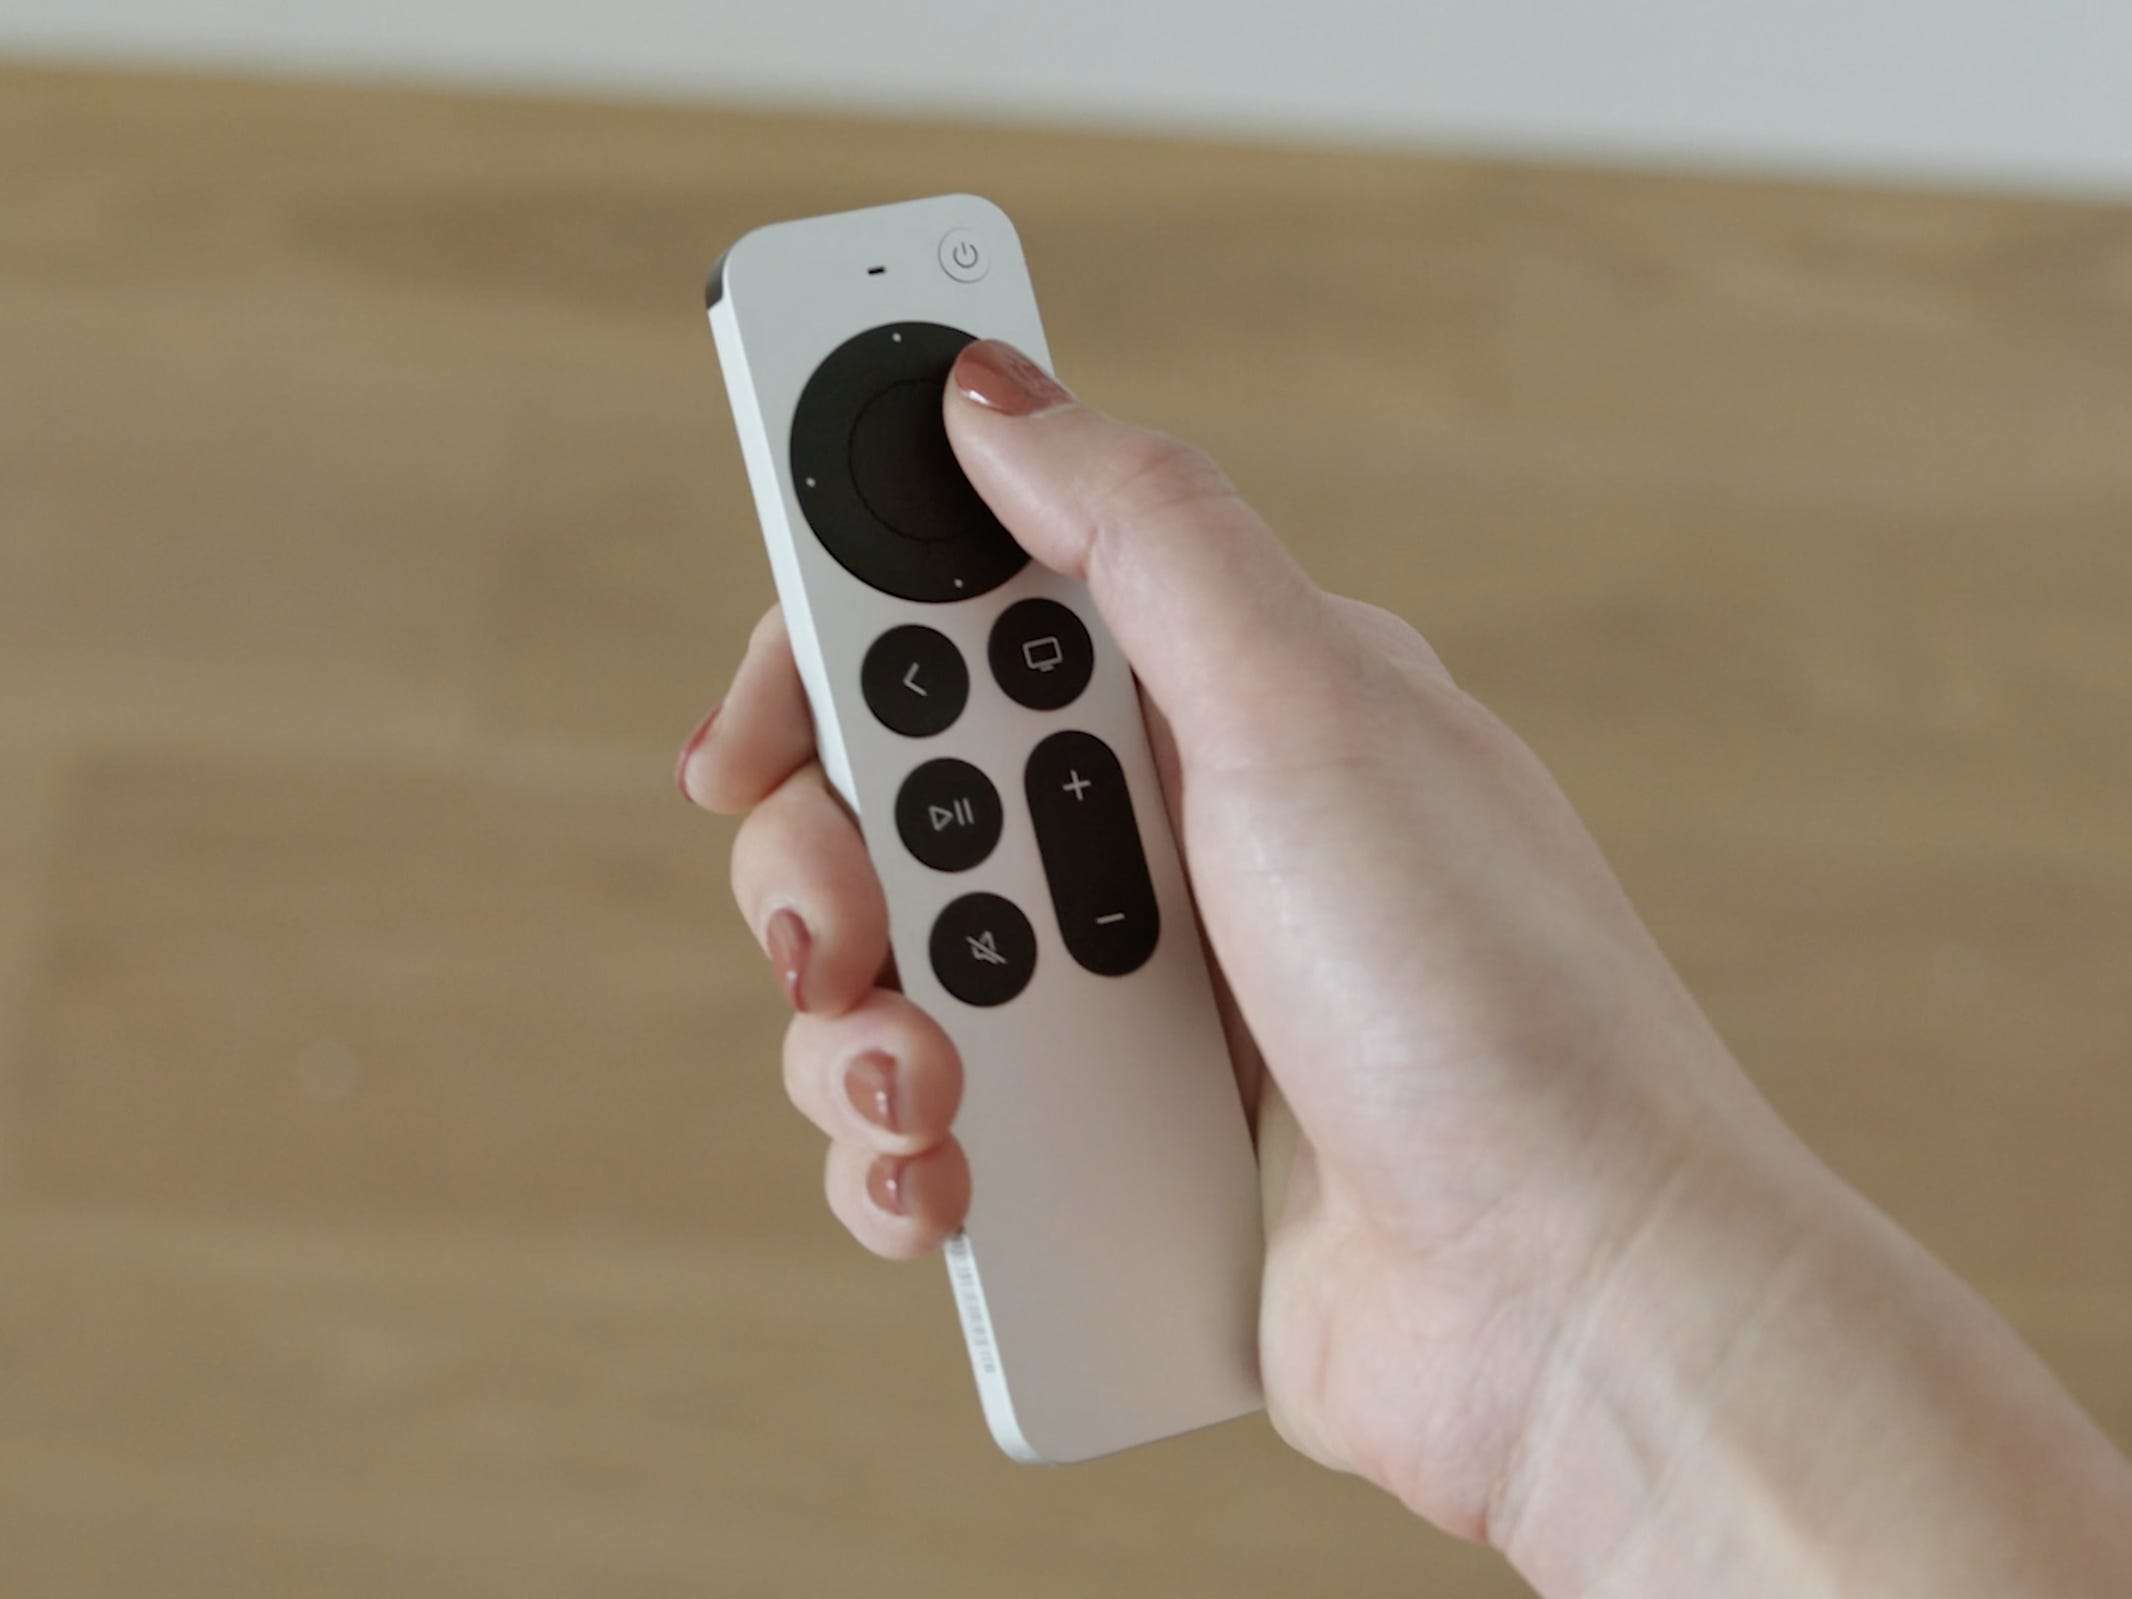 how-to-use-apple-tv-remote-4k-lifescienceglobal